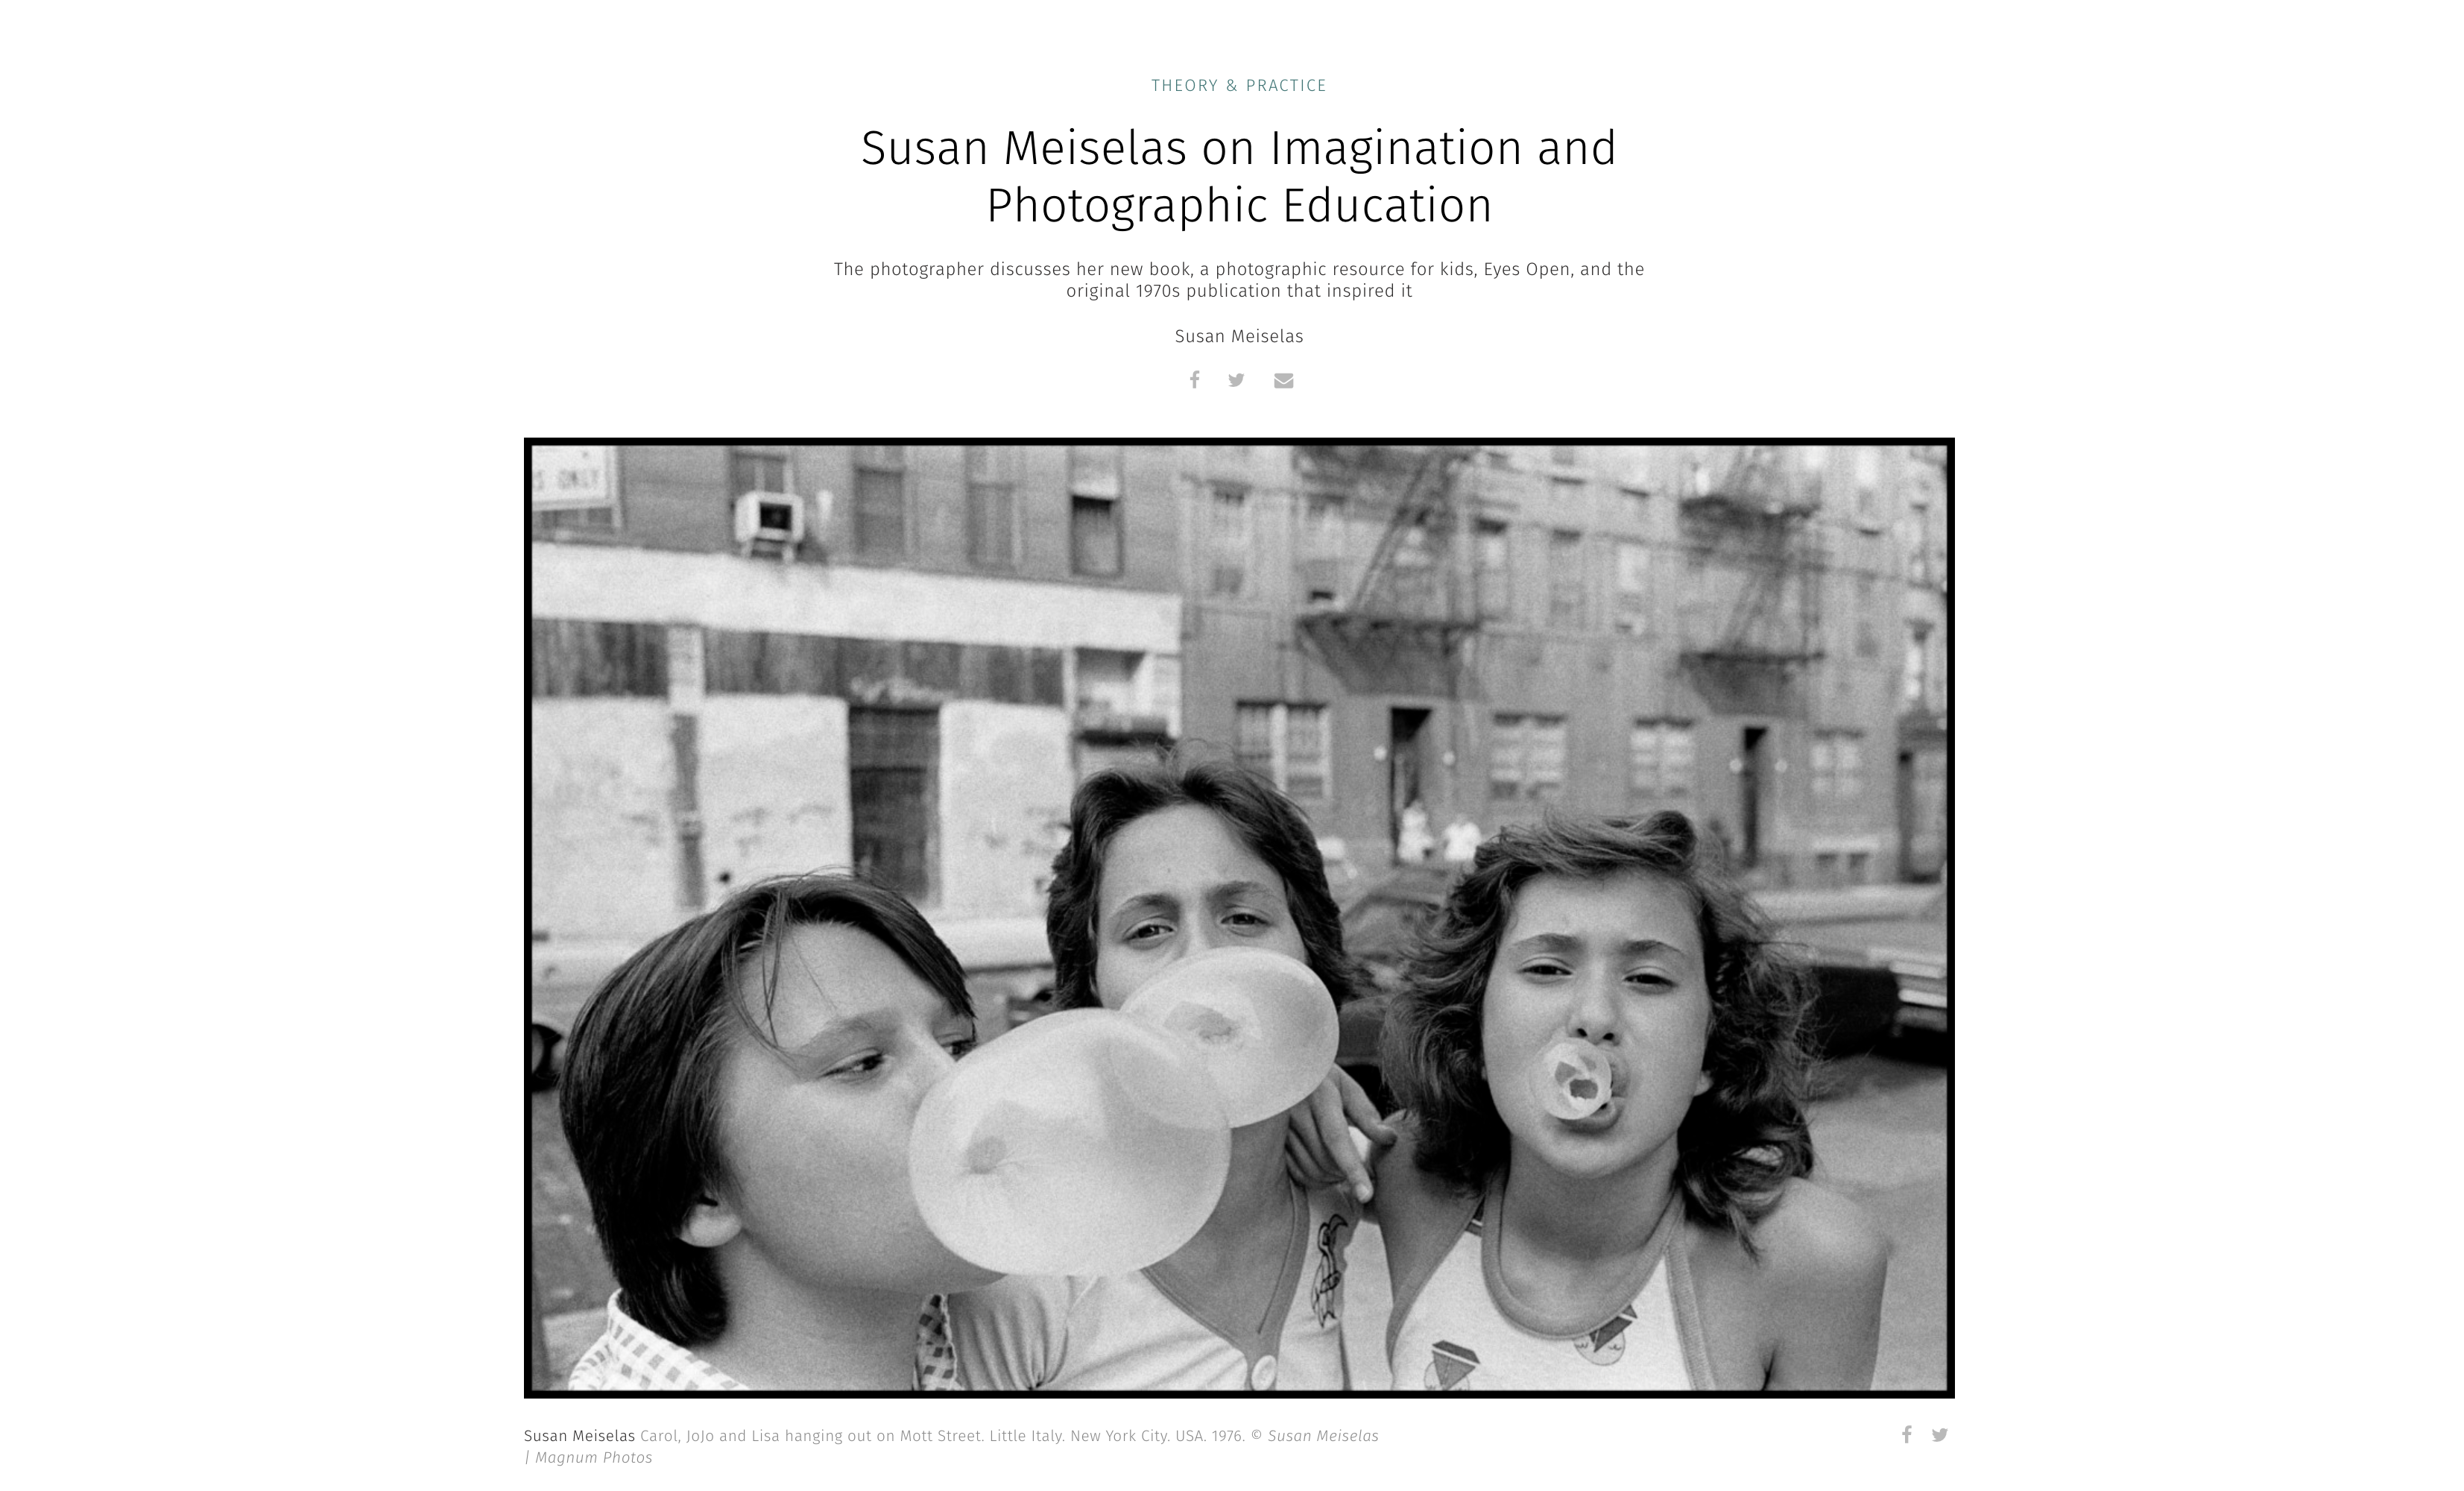 Thumbnail of Magnum Photos: Susan Meiselas on Imagination and Photographic Education